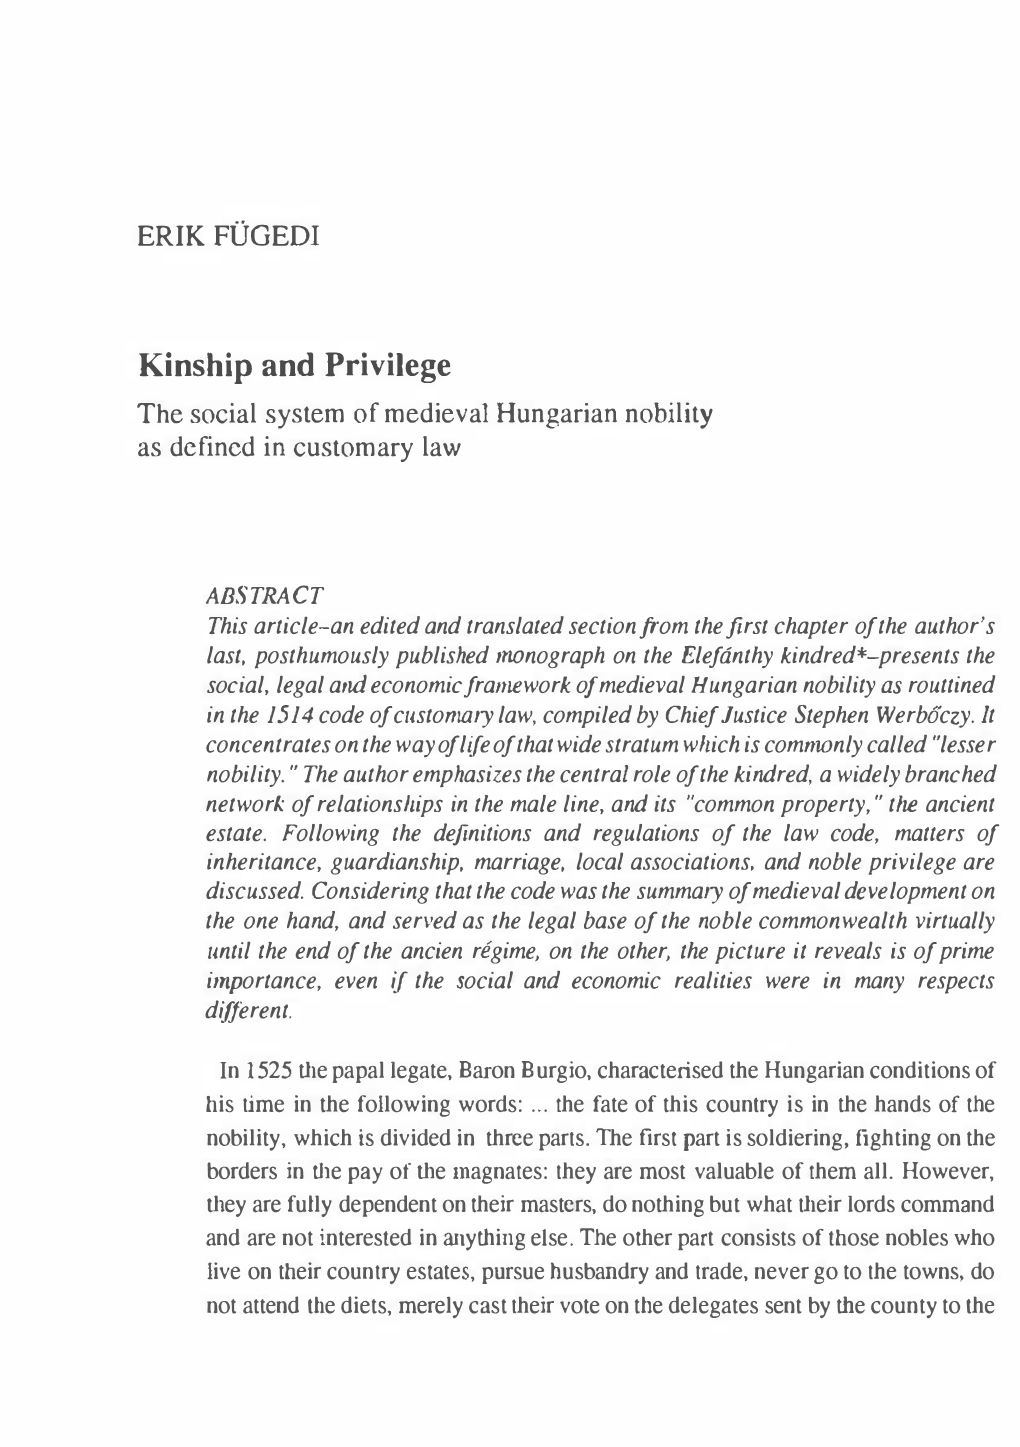 Kinship and Privilege the Social System of Medieval Hungarian Nobility As Defined in Customary Law